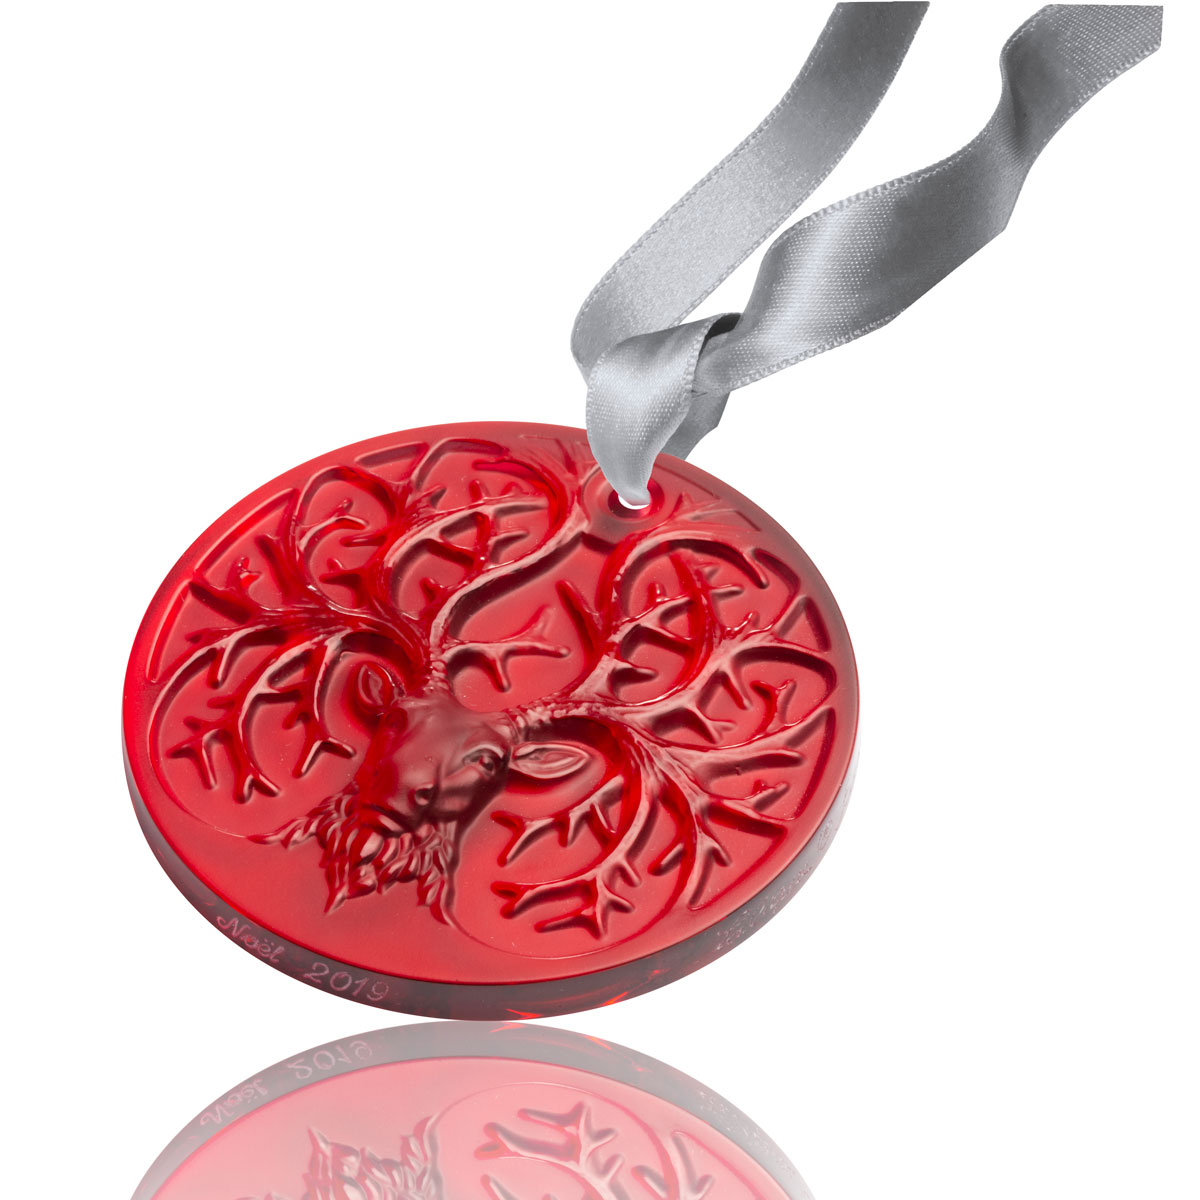 Lalique 2019 Reindeer Christmas Ornament, Red